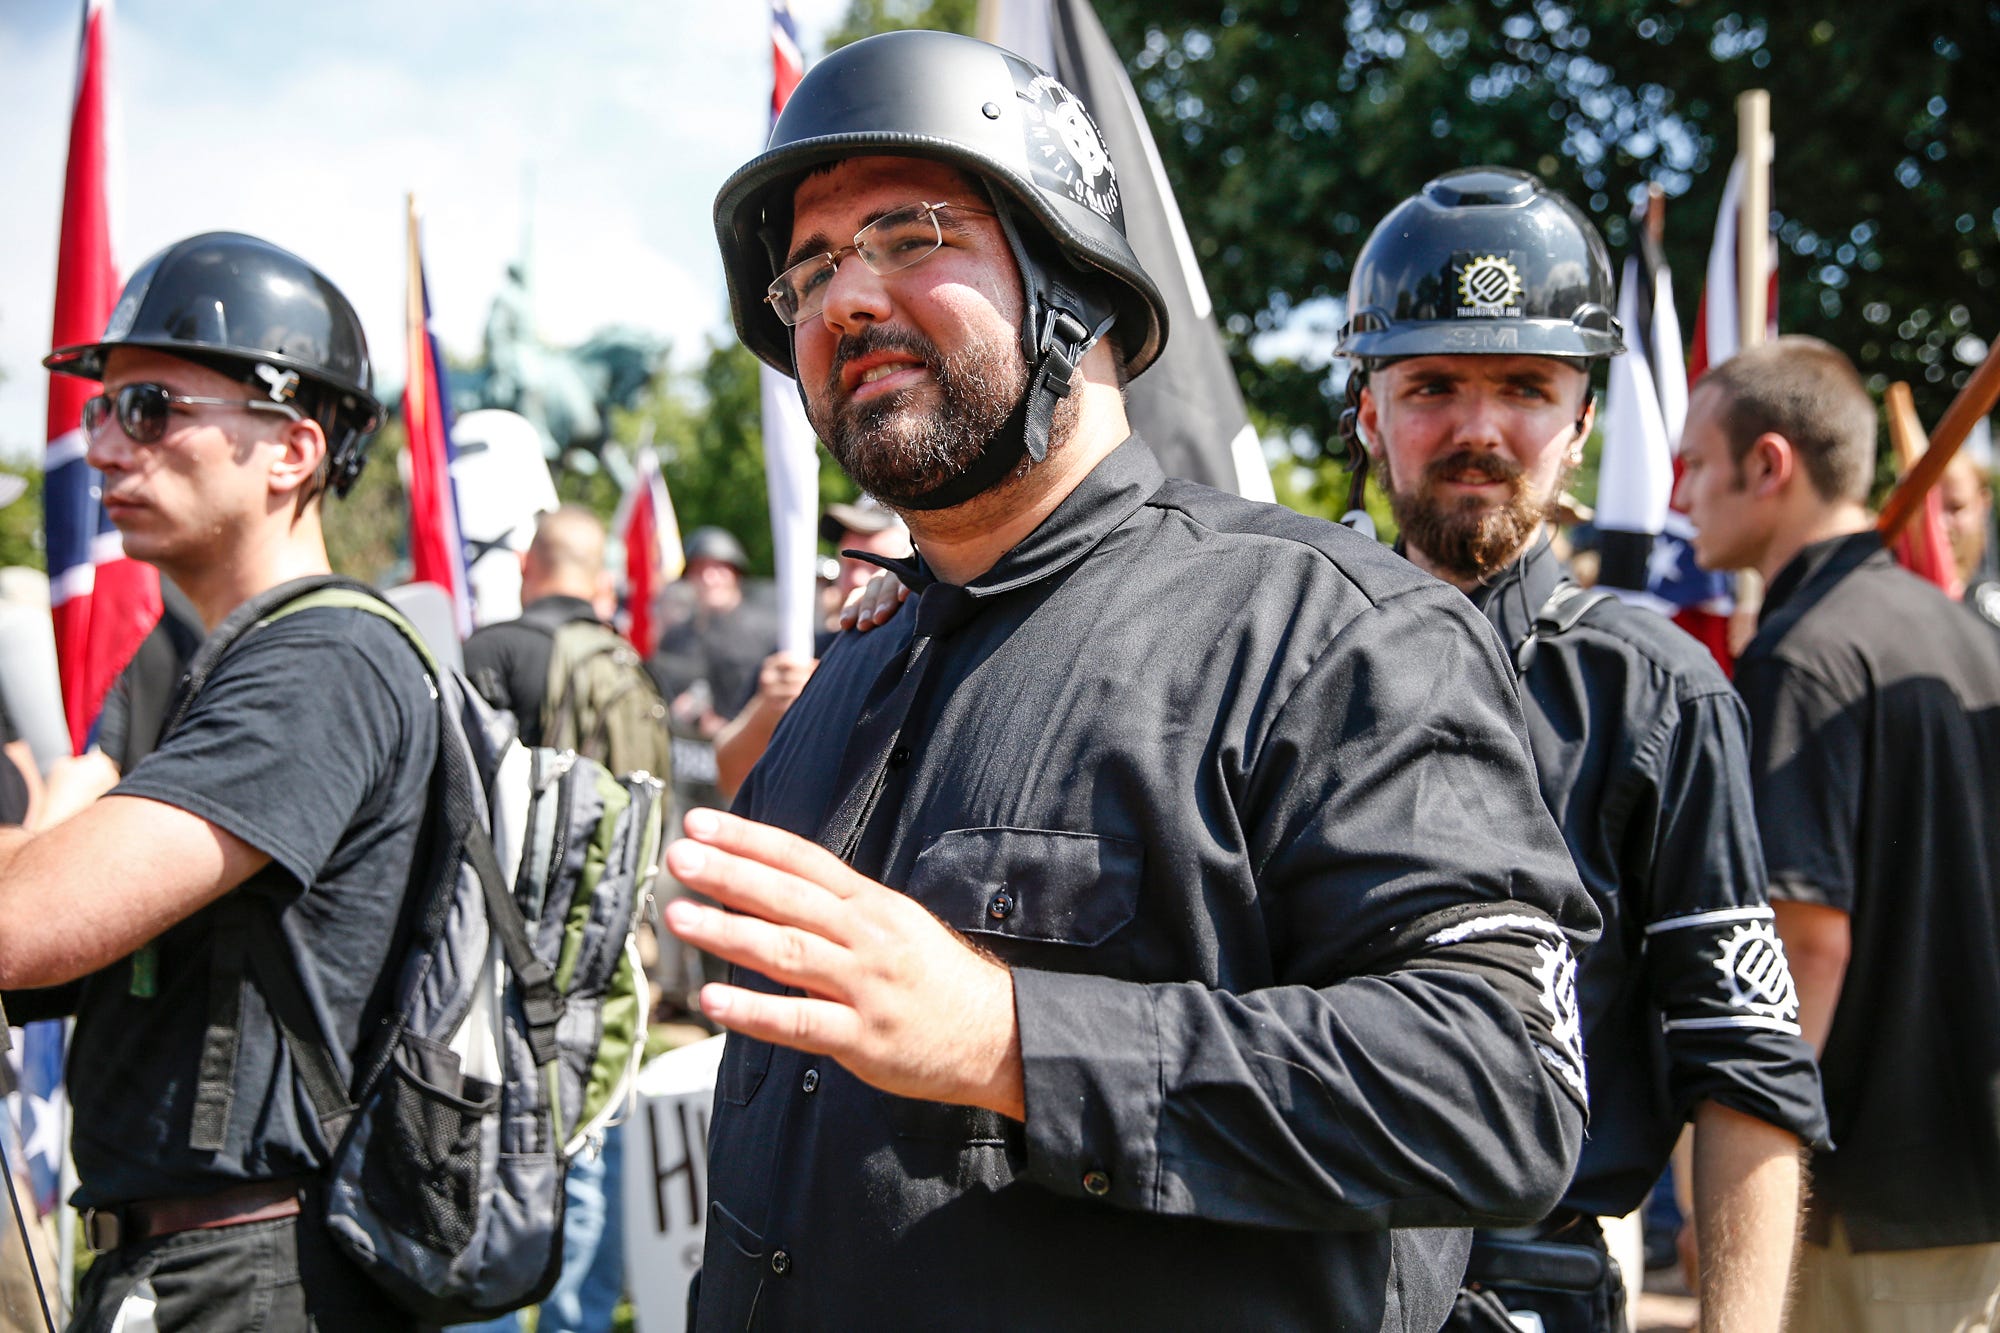 What we know about Matthew Heimbach, Indiana white nationalist who helped promote Charlottesville